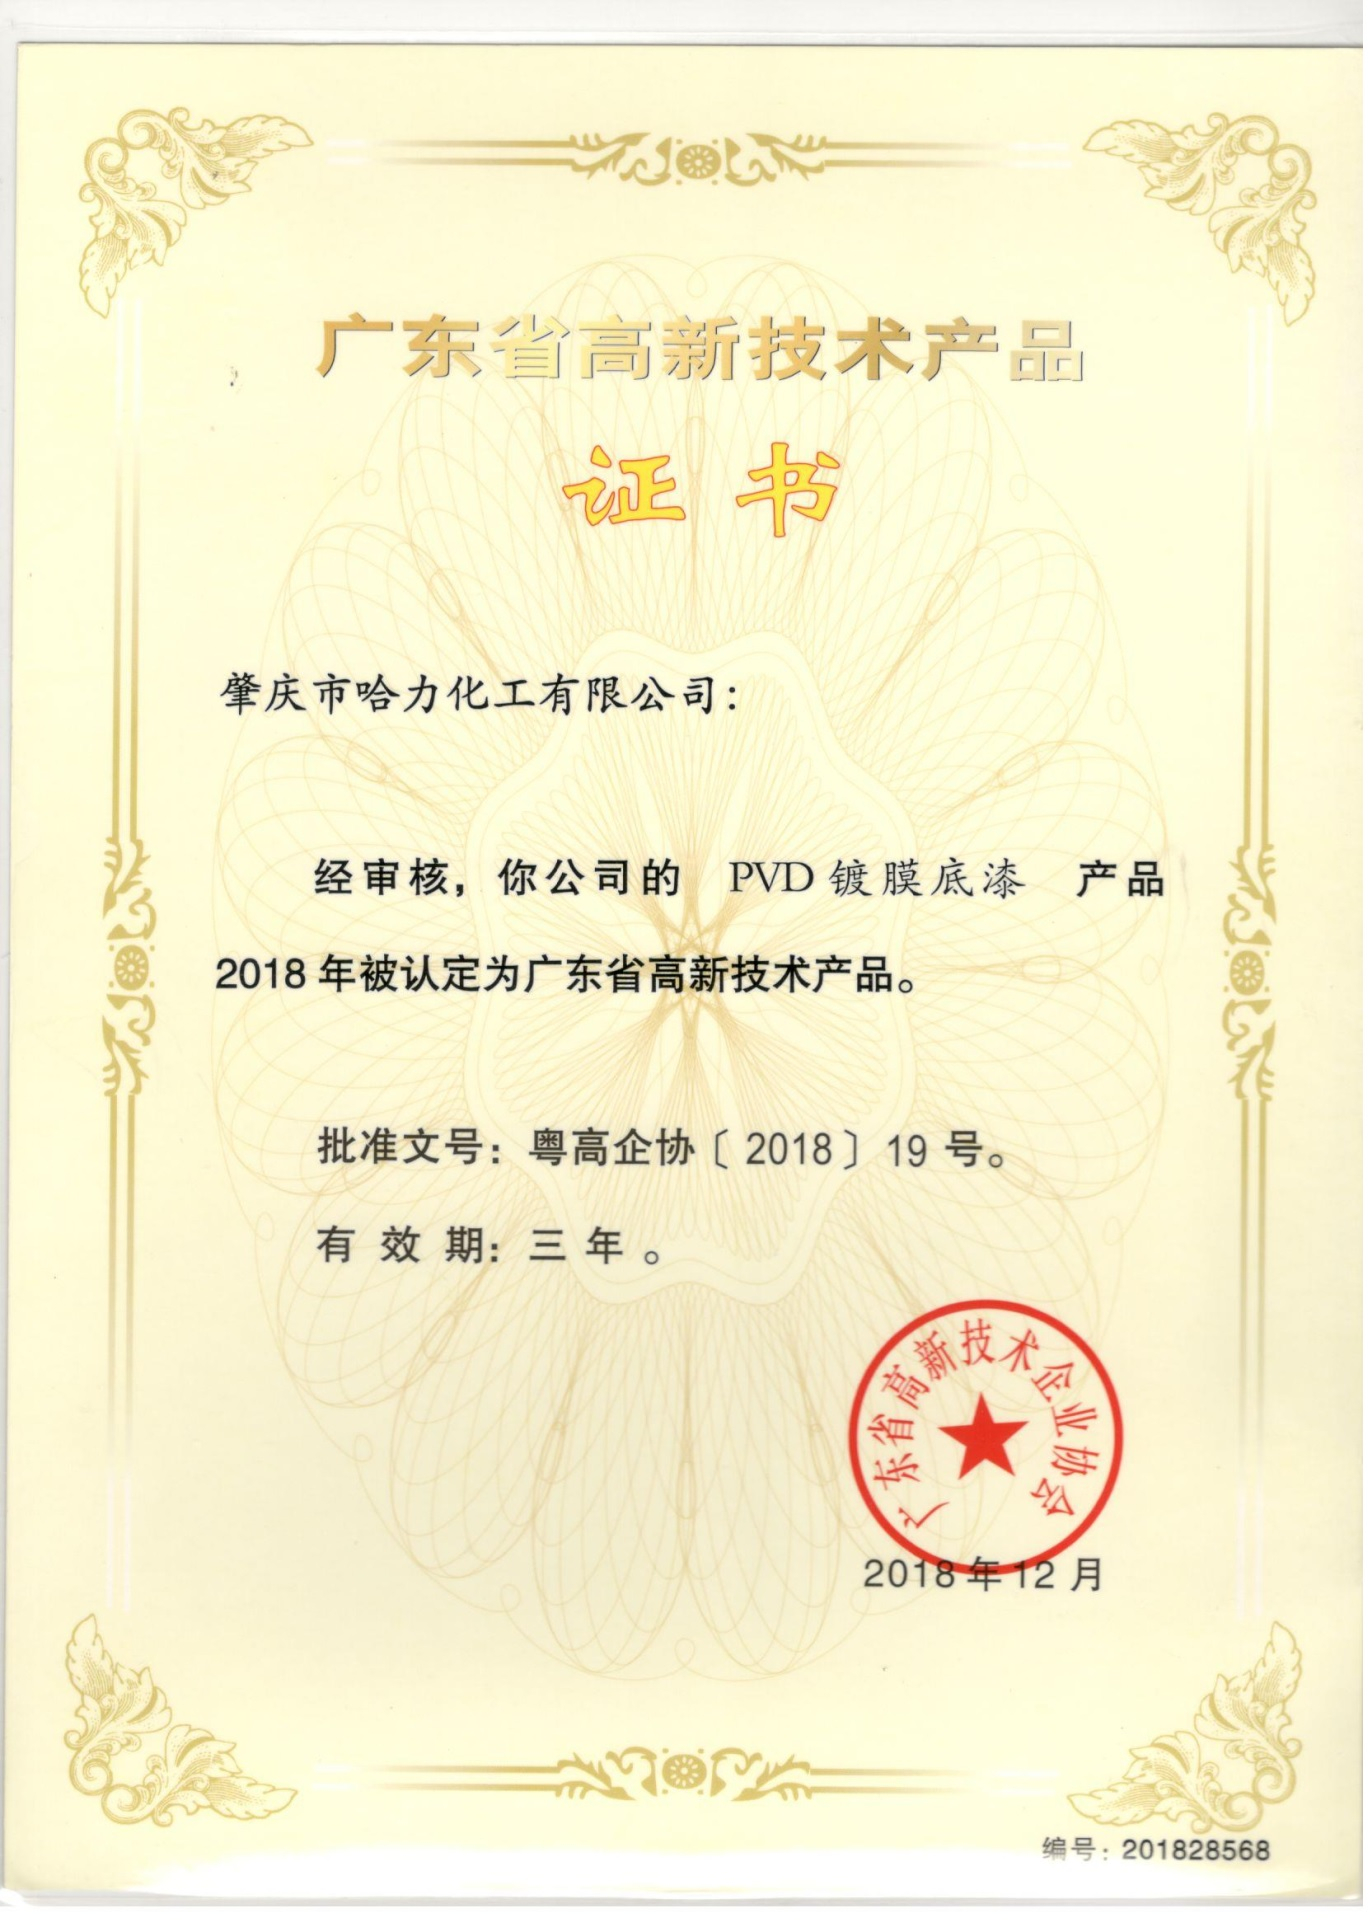 High-tech Product Certificate for PVD Vacuum 